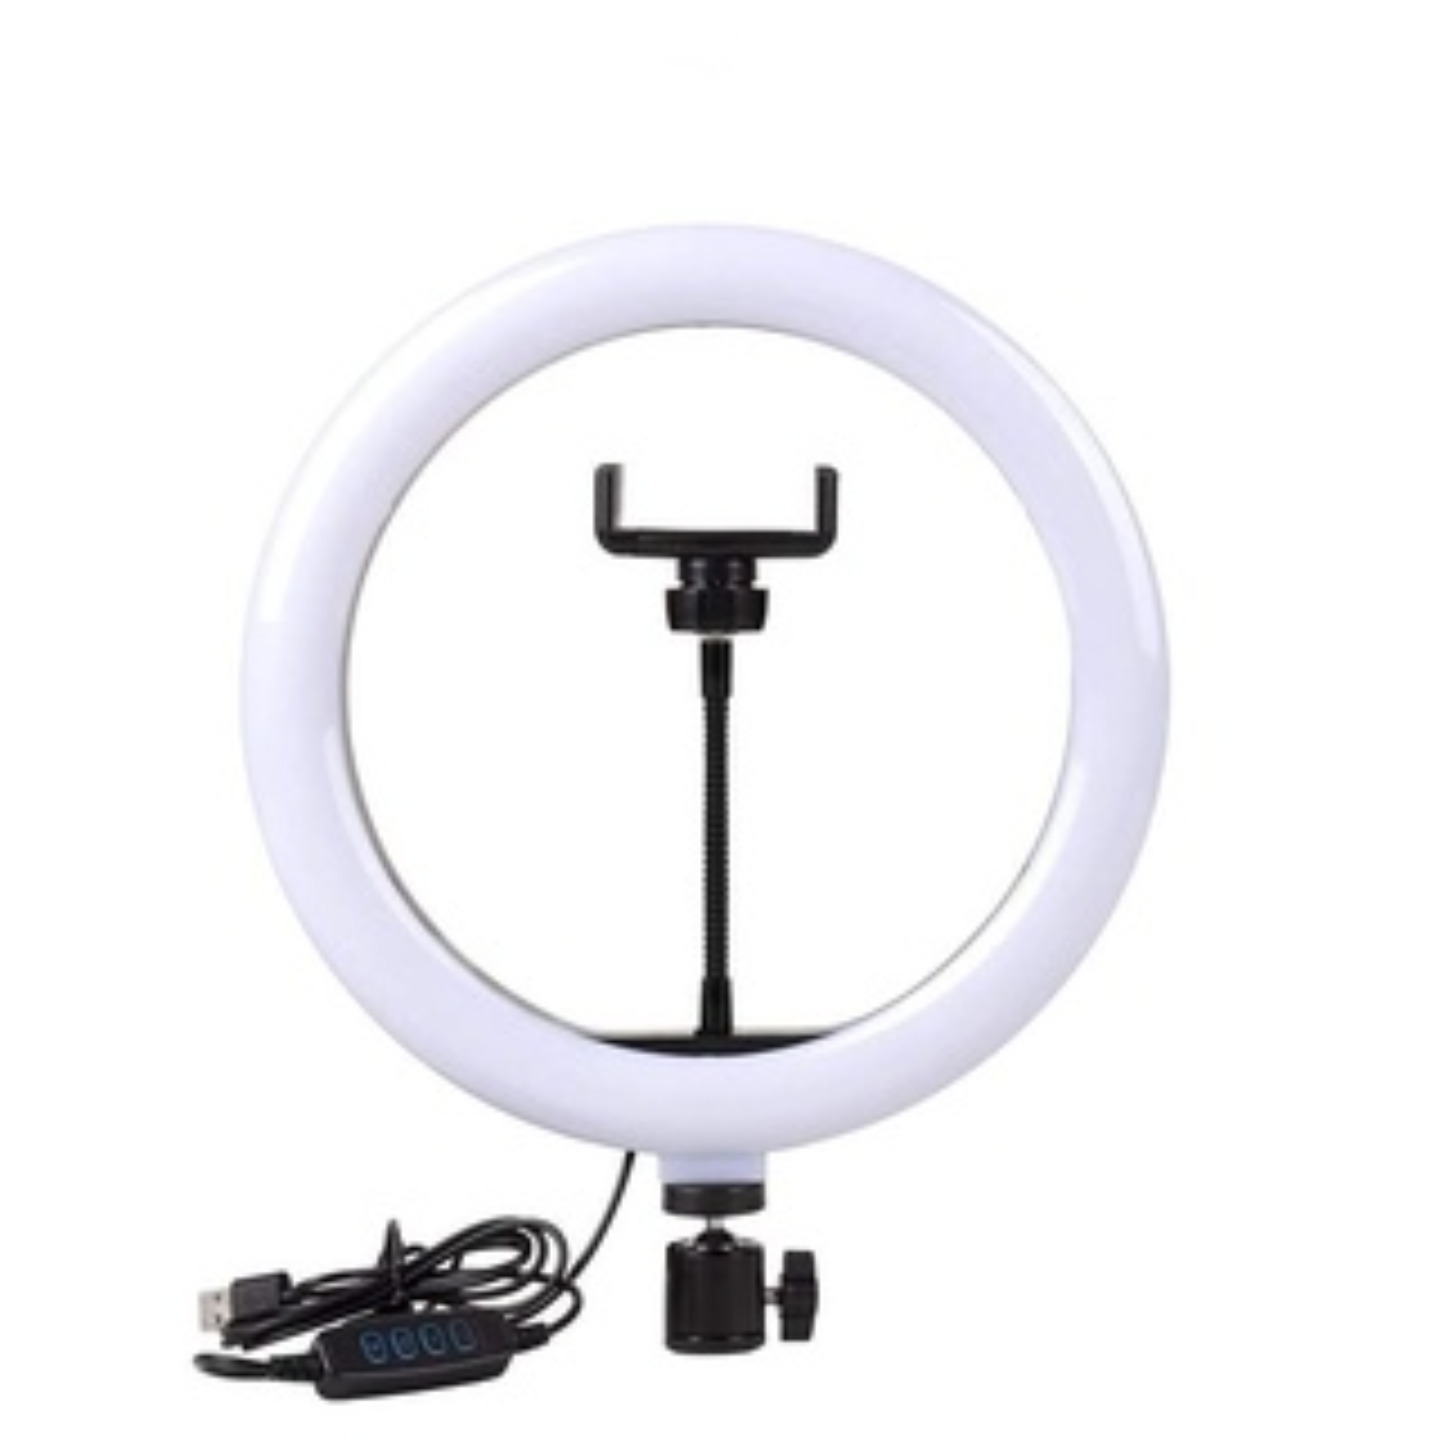 SAMYAKA 10 Portable LED Ring Light with 3 Color Modes Dimmable Lighting